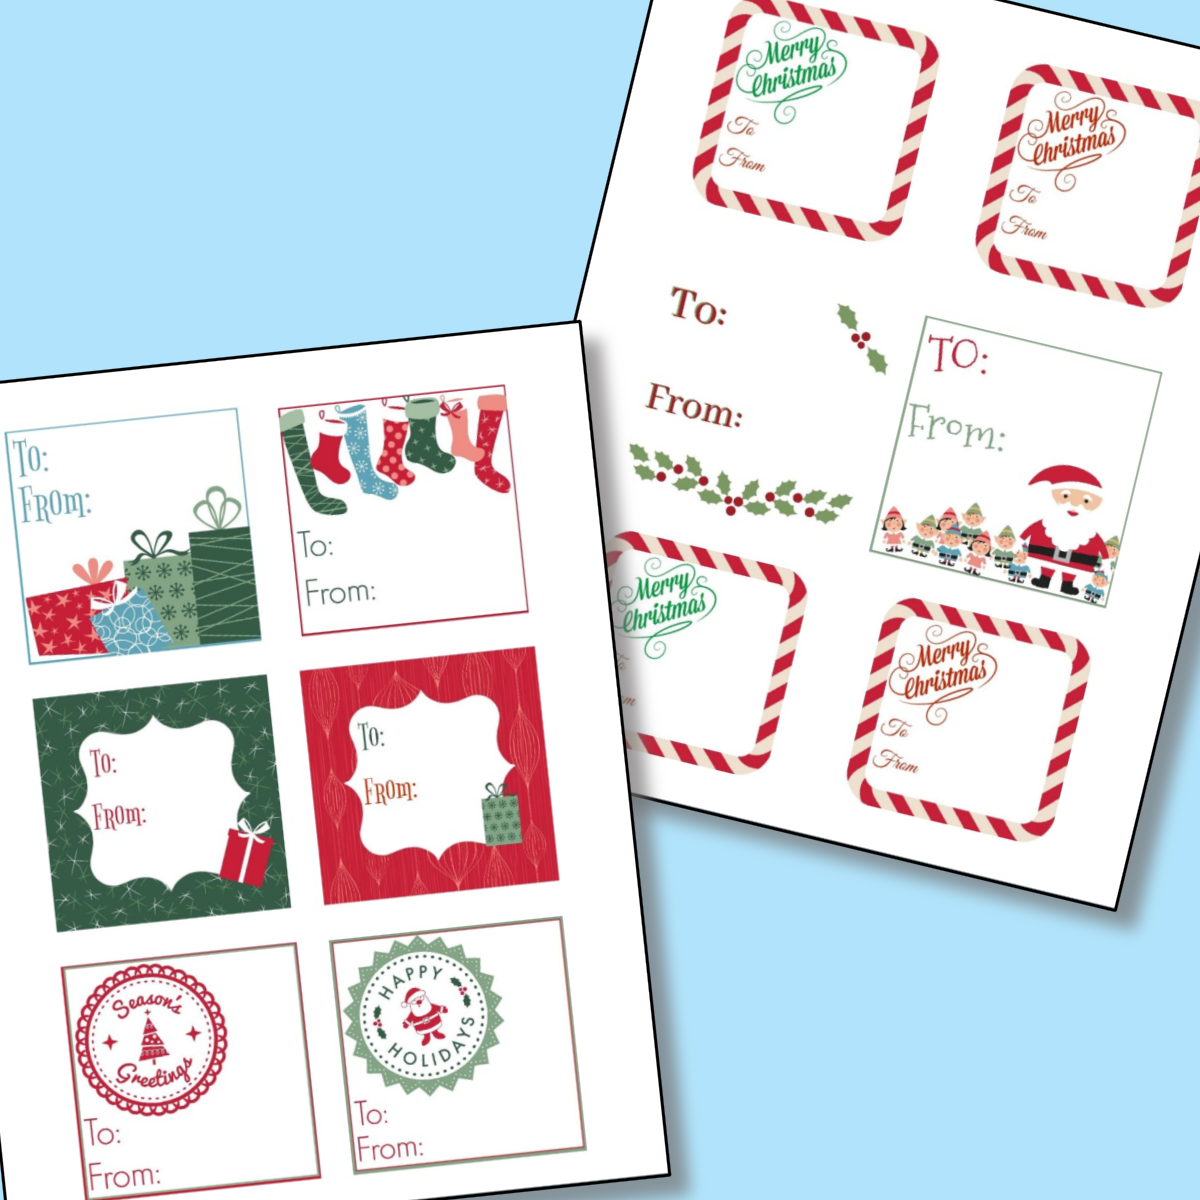 Organized 31 Shop Christmas Gift Tags for printing on full page sticker paper.